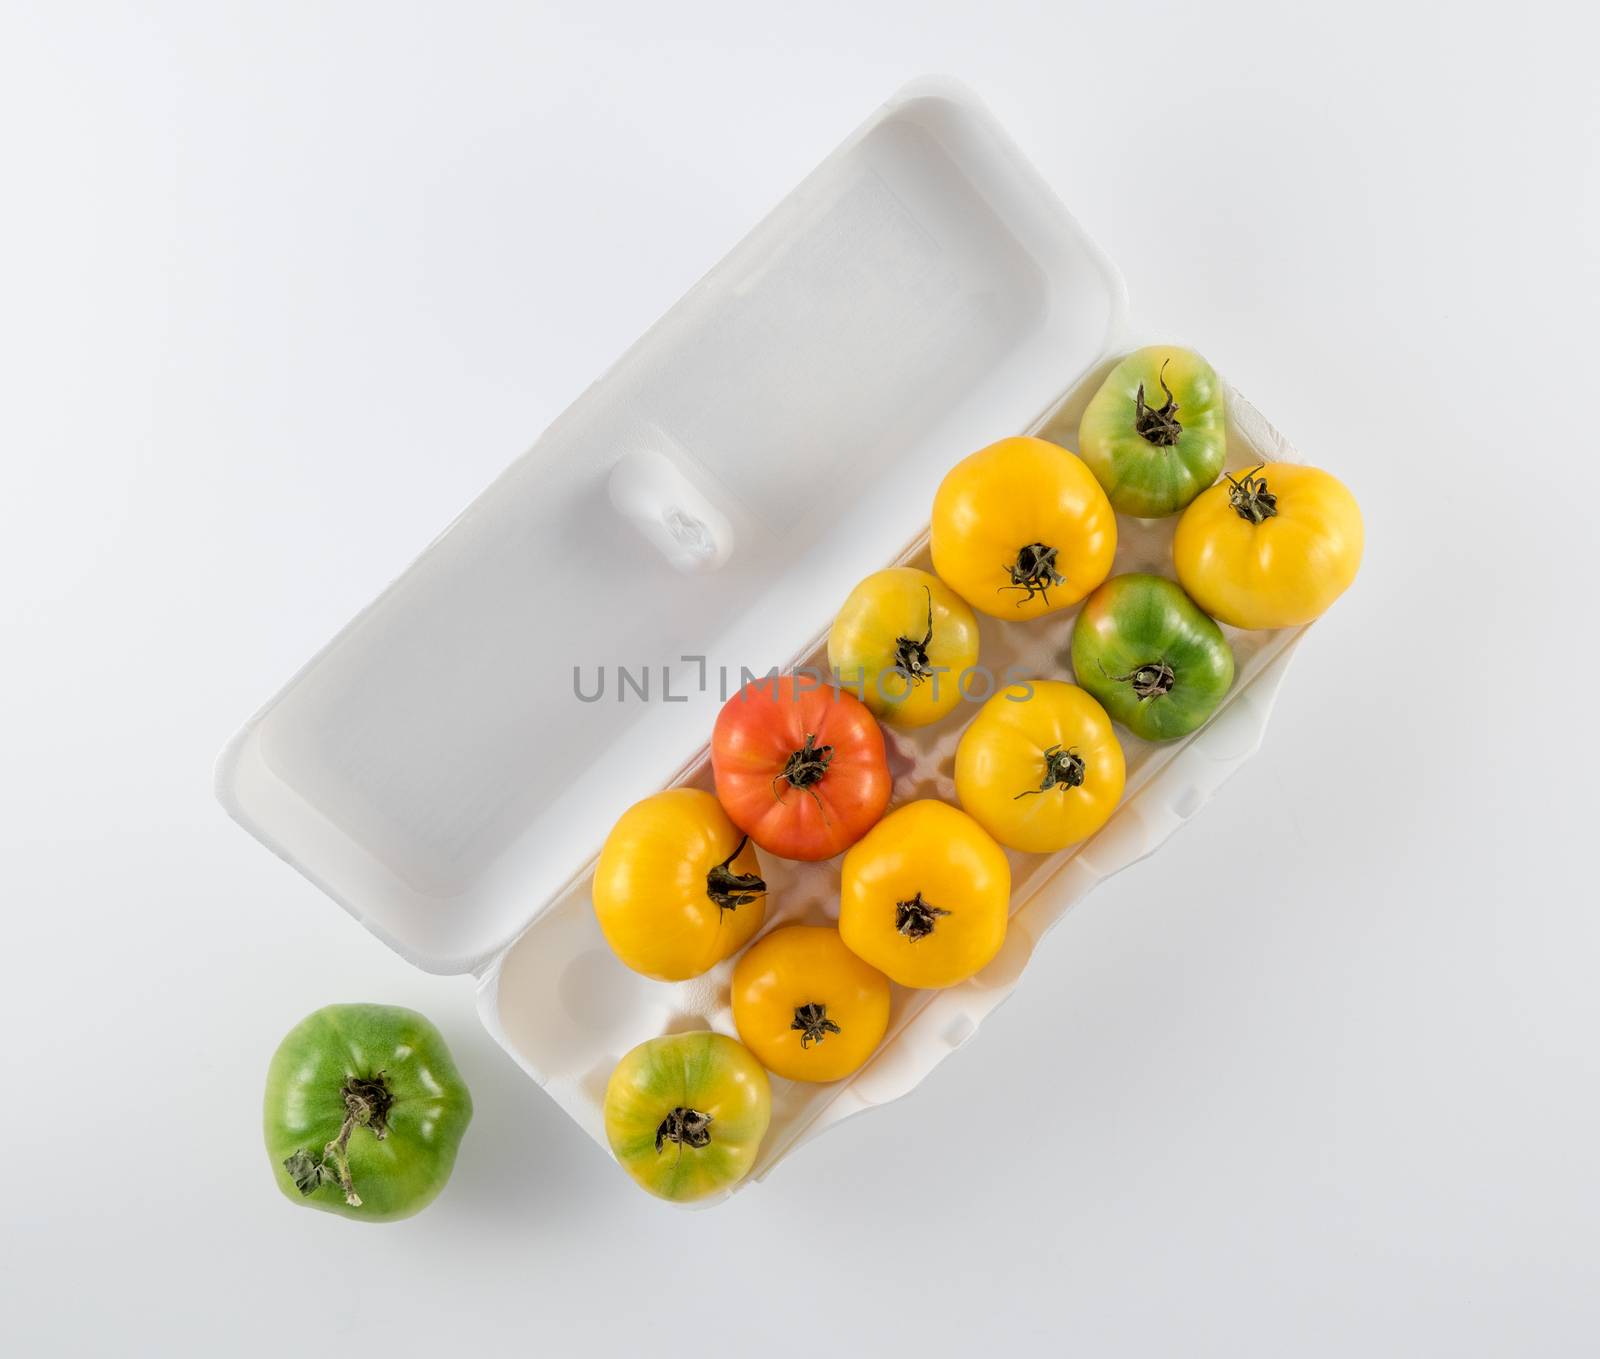 Tomato Variety in Egg Carton by krisblackphotography